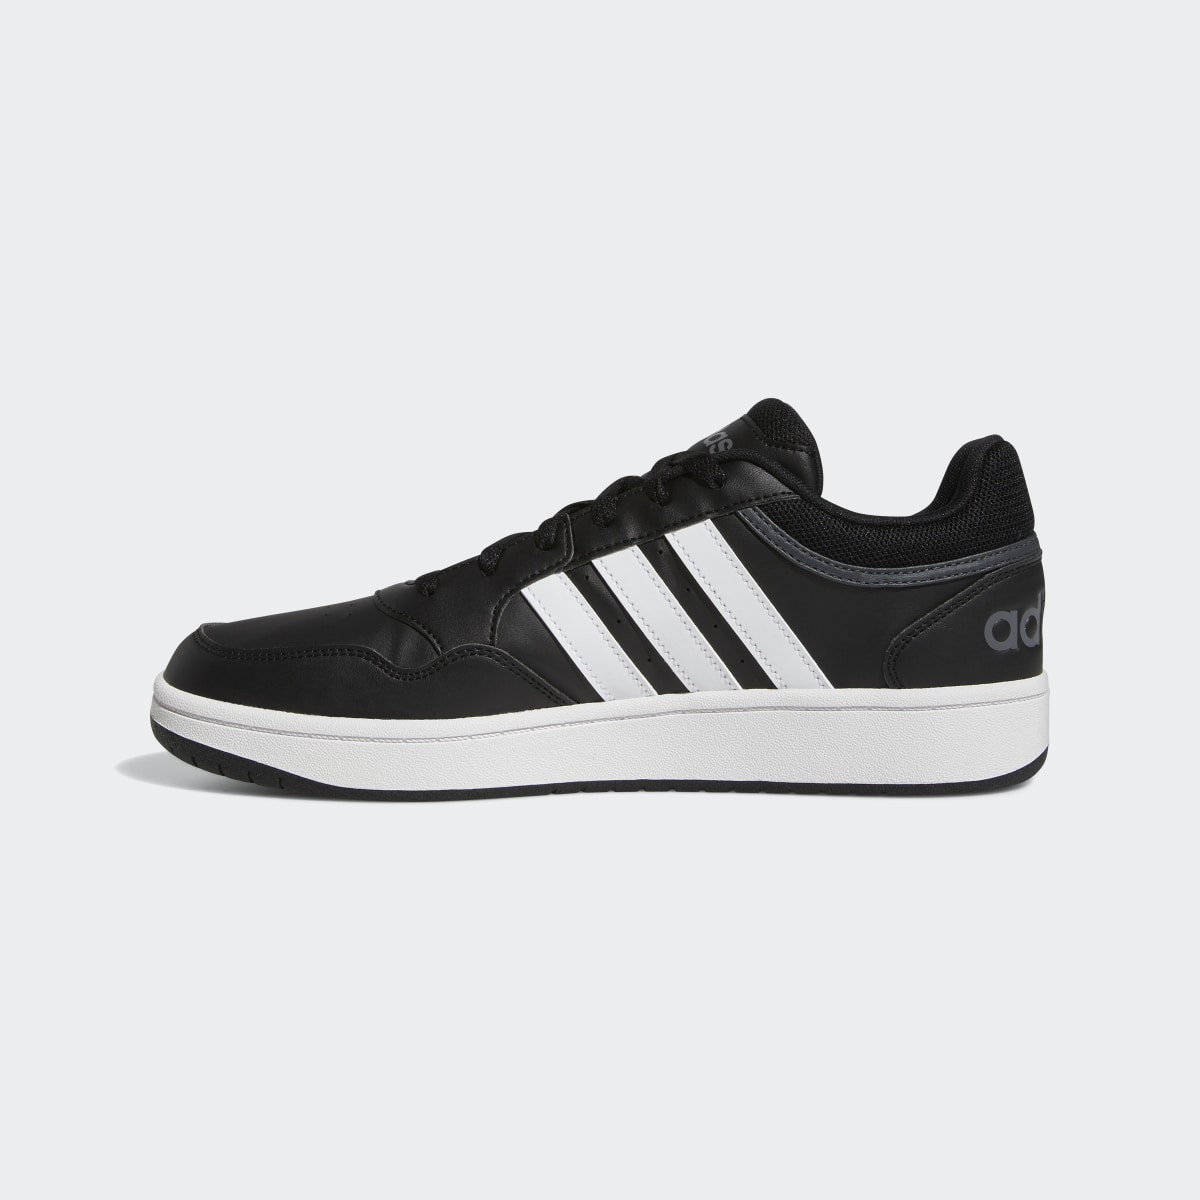 Adidas Hoops 3.0 Low Classic Vintage Shoes. 7